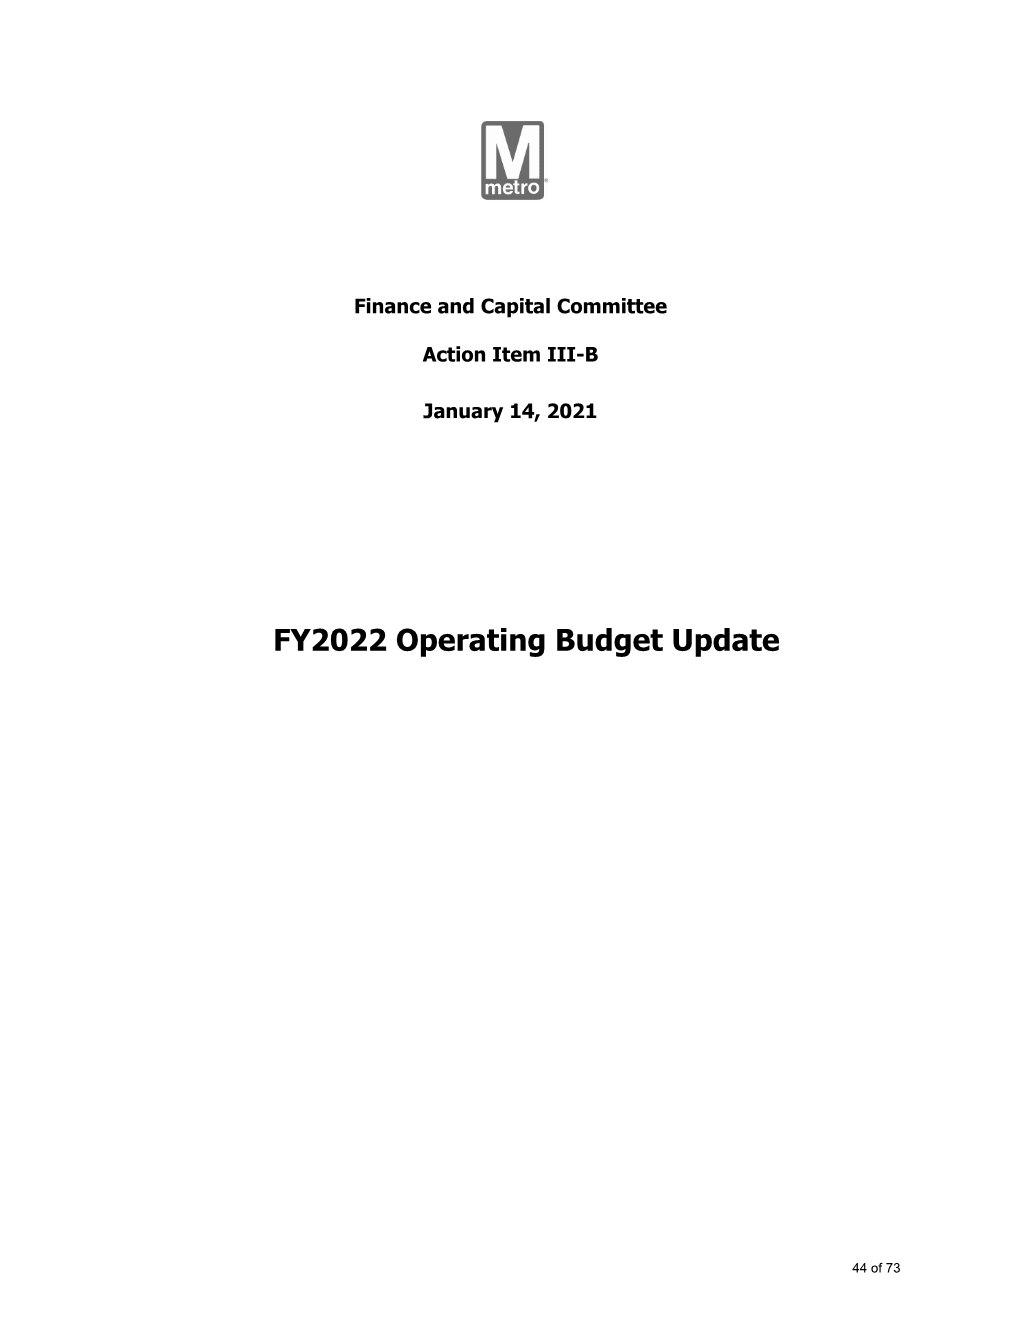 FY2022 Operating Budget Update